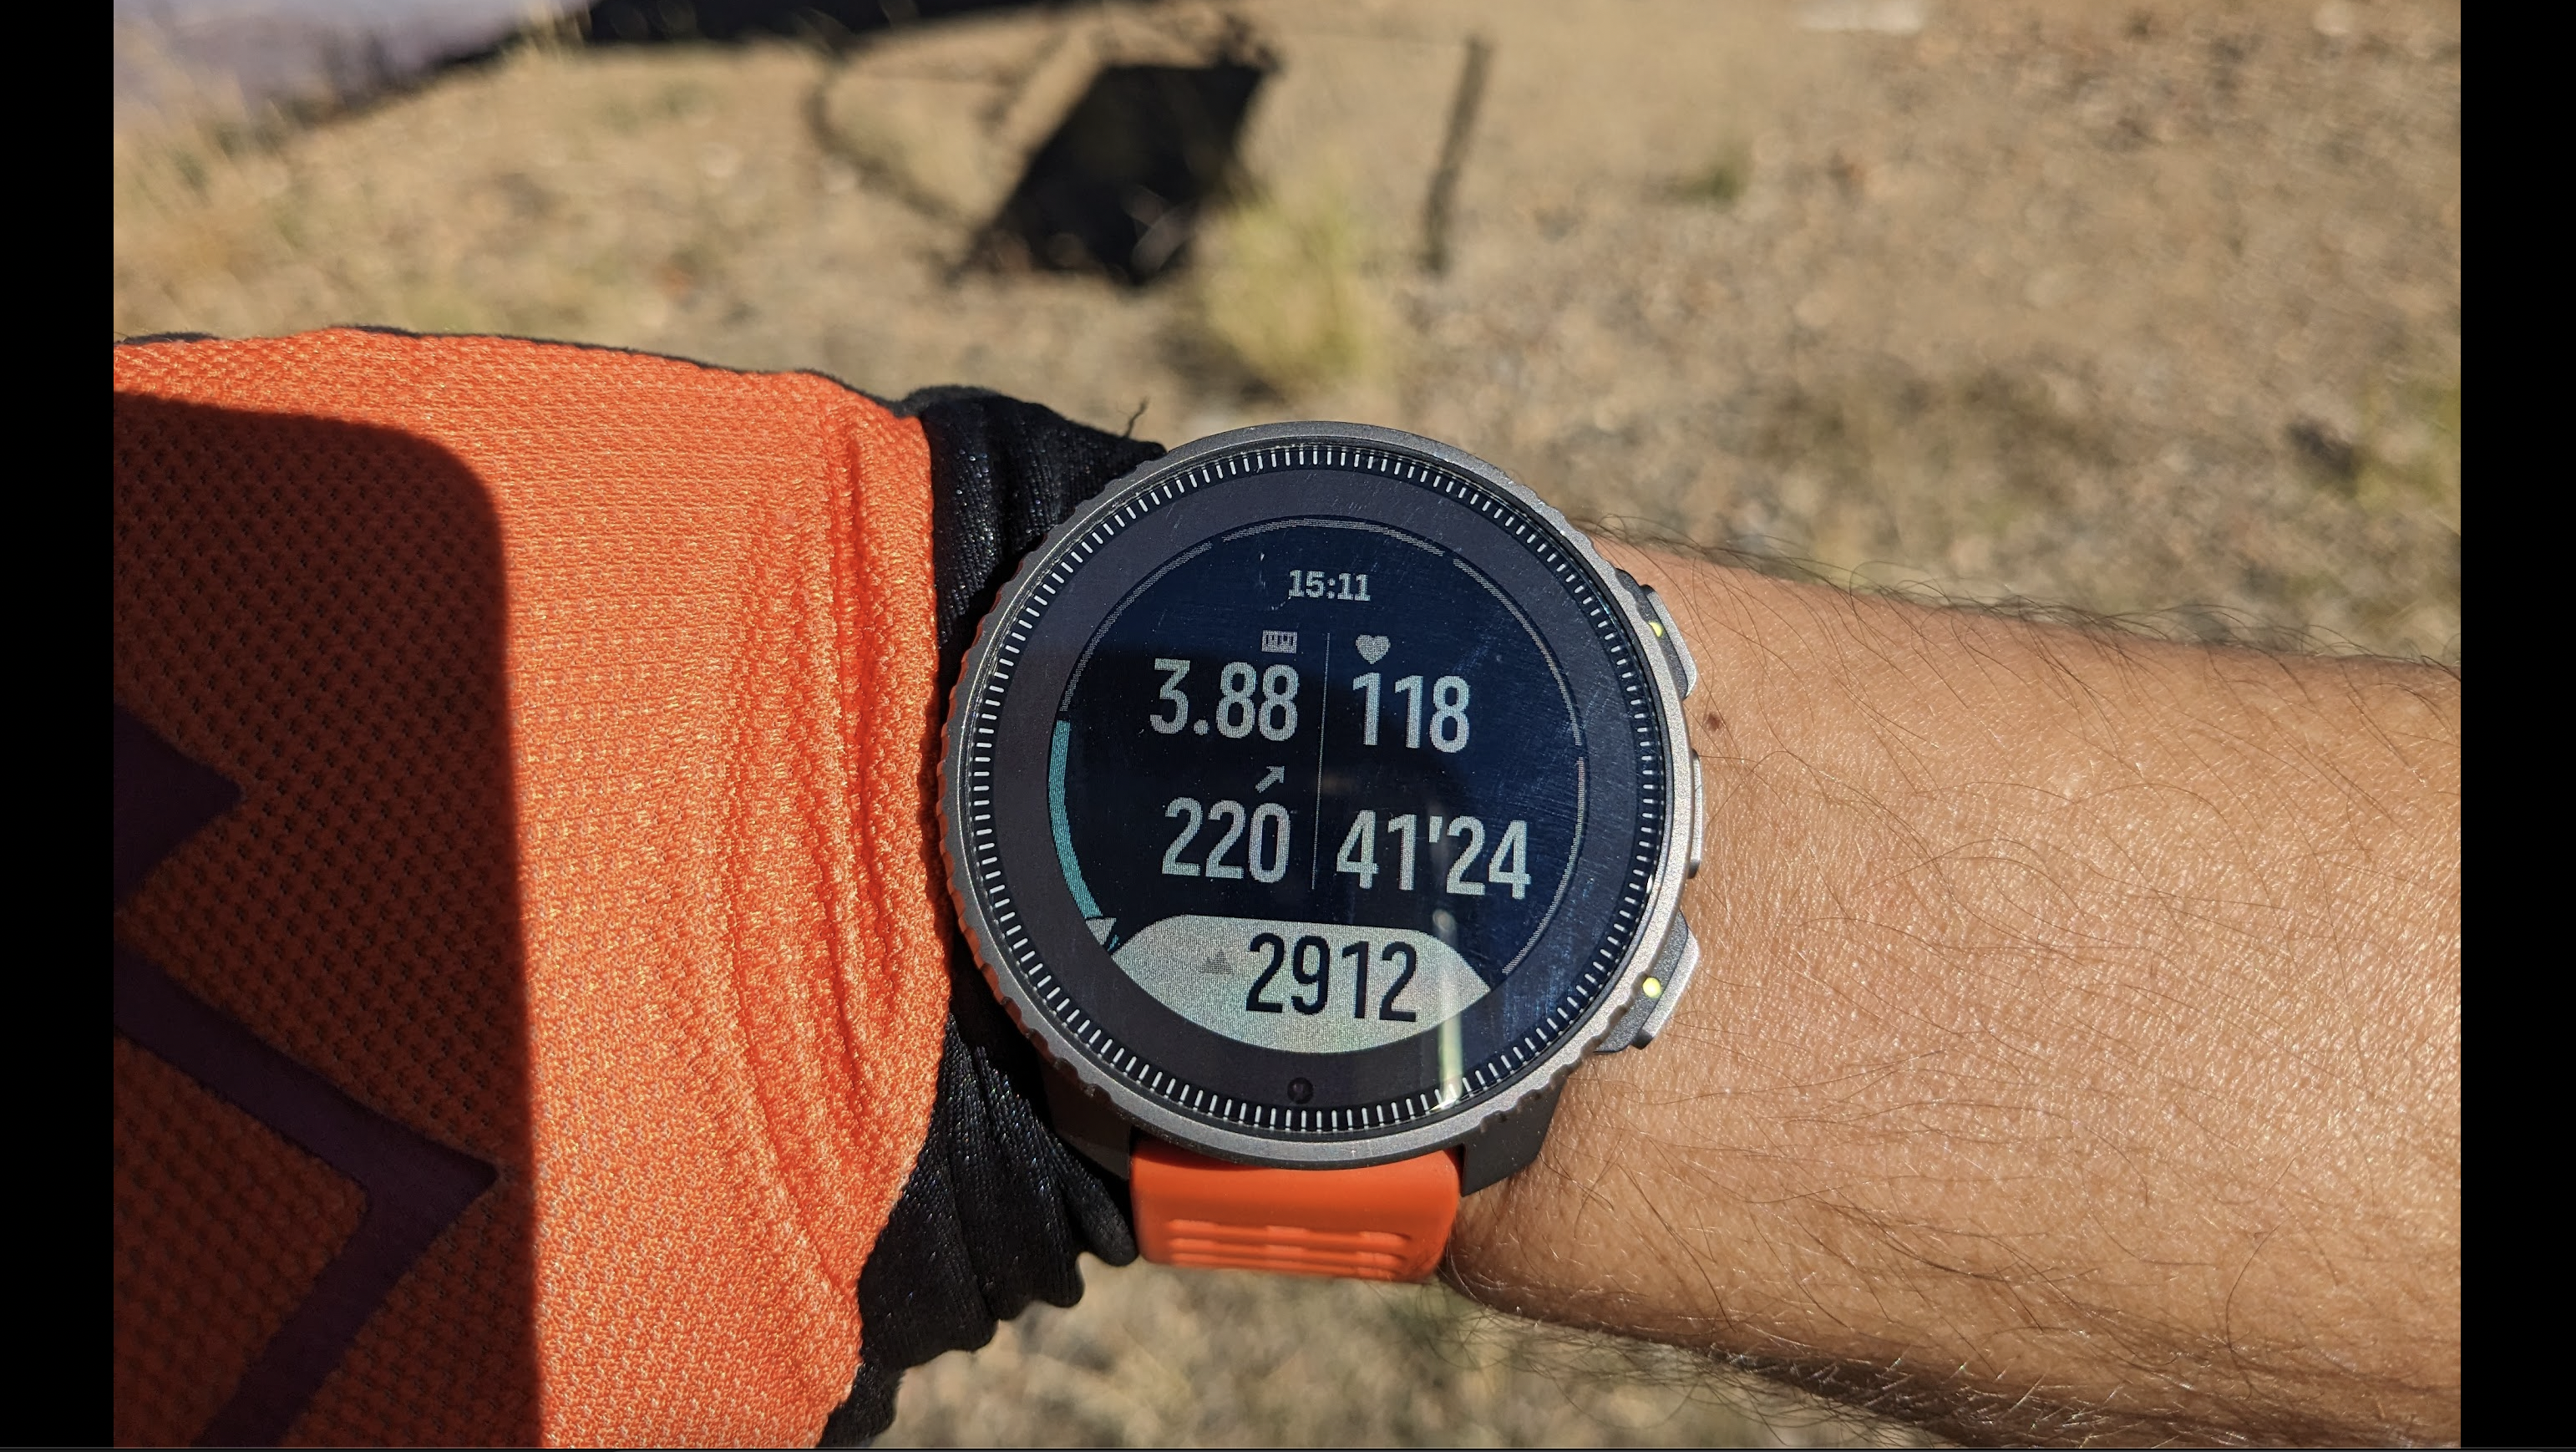 Suunto Vertical GPS Watch In-Depth Review: Solar, Mapping, WiFi